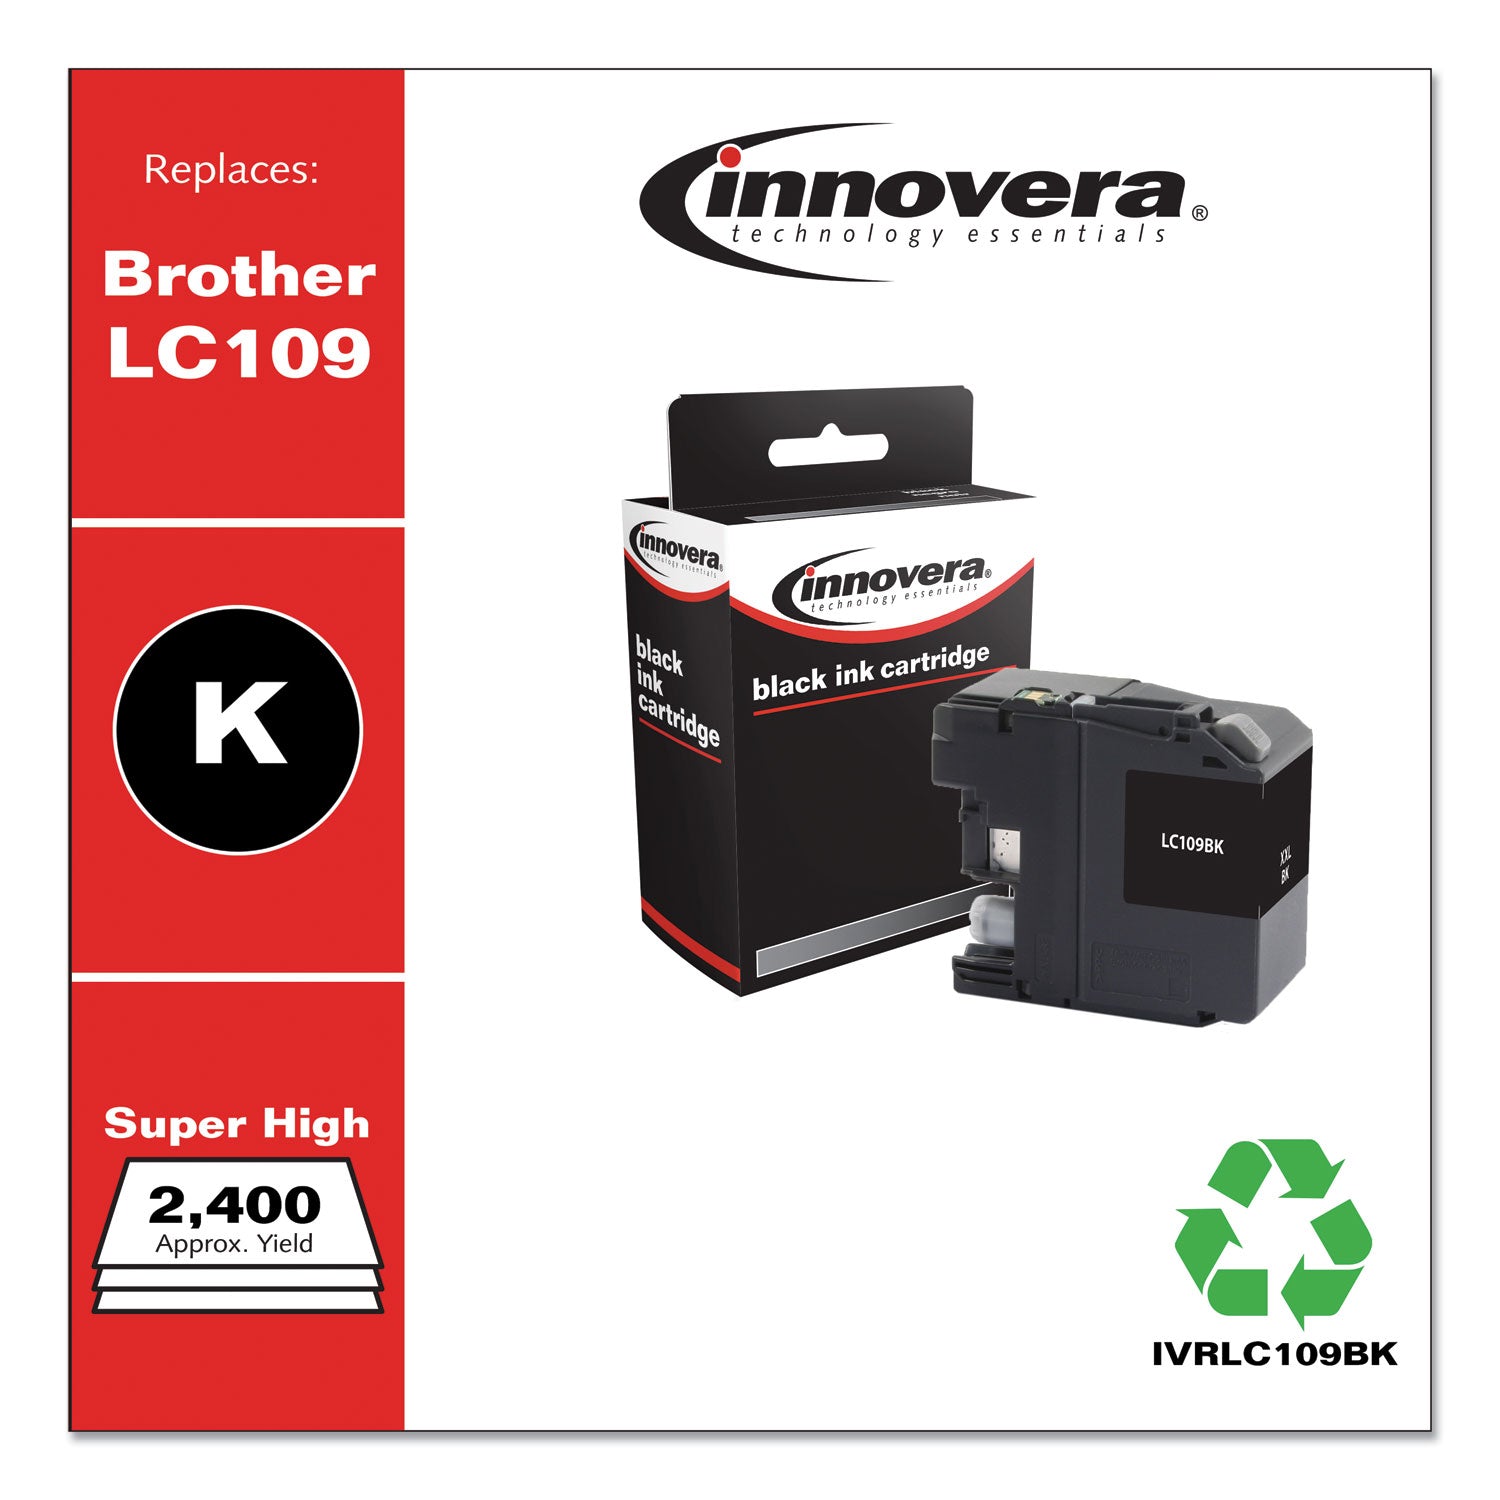 remanufactured-black-super-high-yield-replacement-for-lc109bk-2400-page-yield_ivrlc109bk - 2